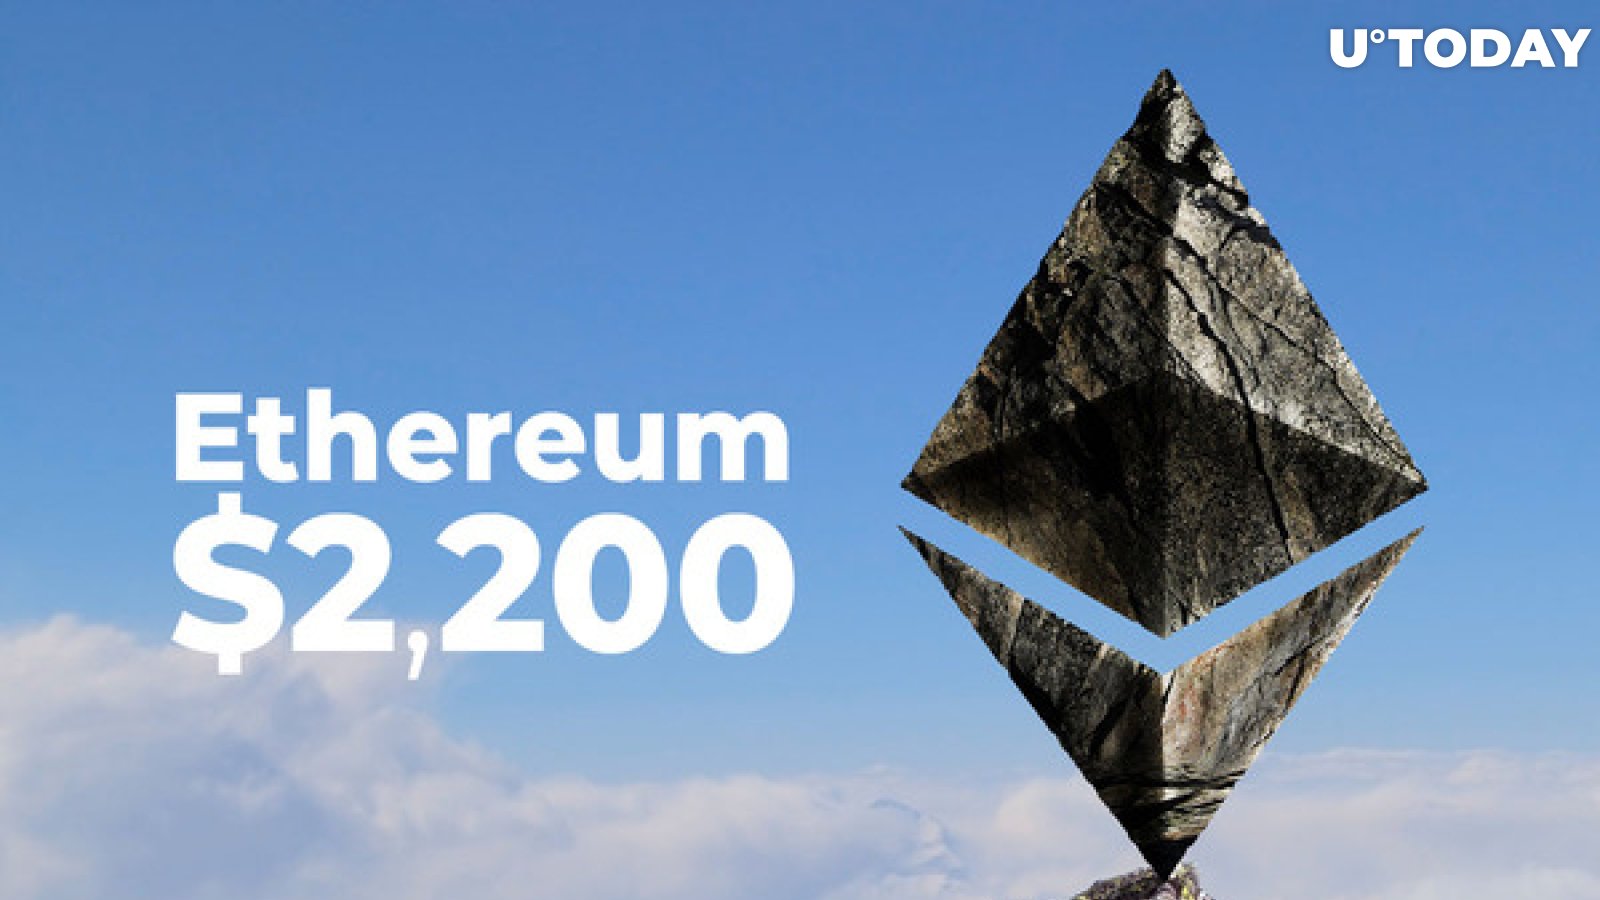 Possible Reasons of Why Ethereum Has Hit New All-Time High of $2,200